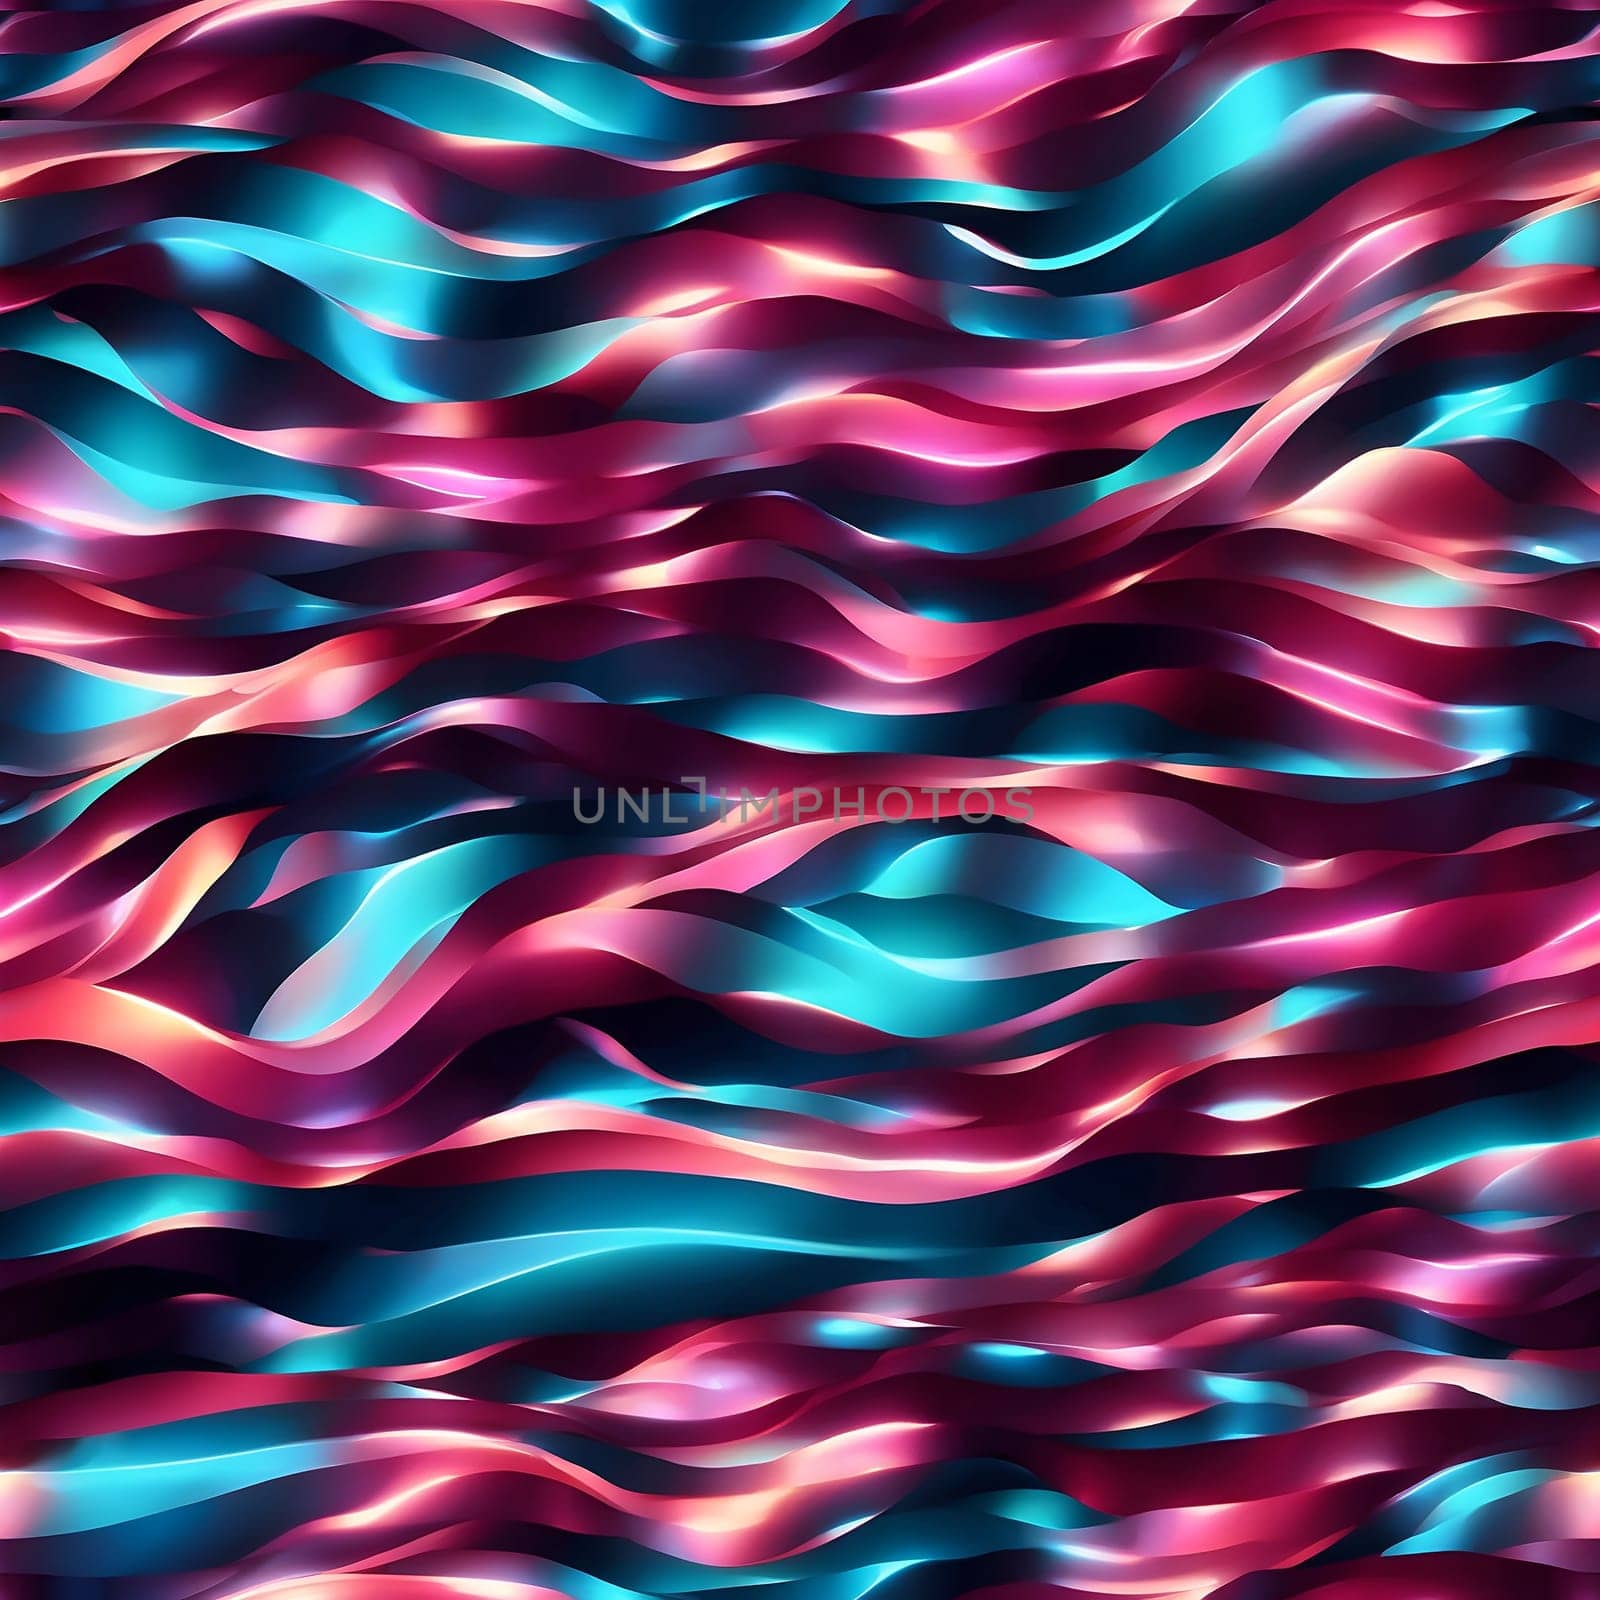 A seamless pattern featuring a lively and dynamic display of wavy lines in an array of vibrant colors.